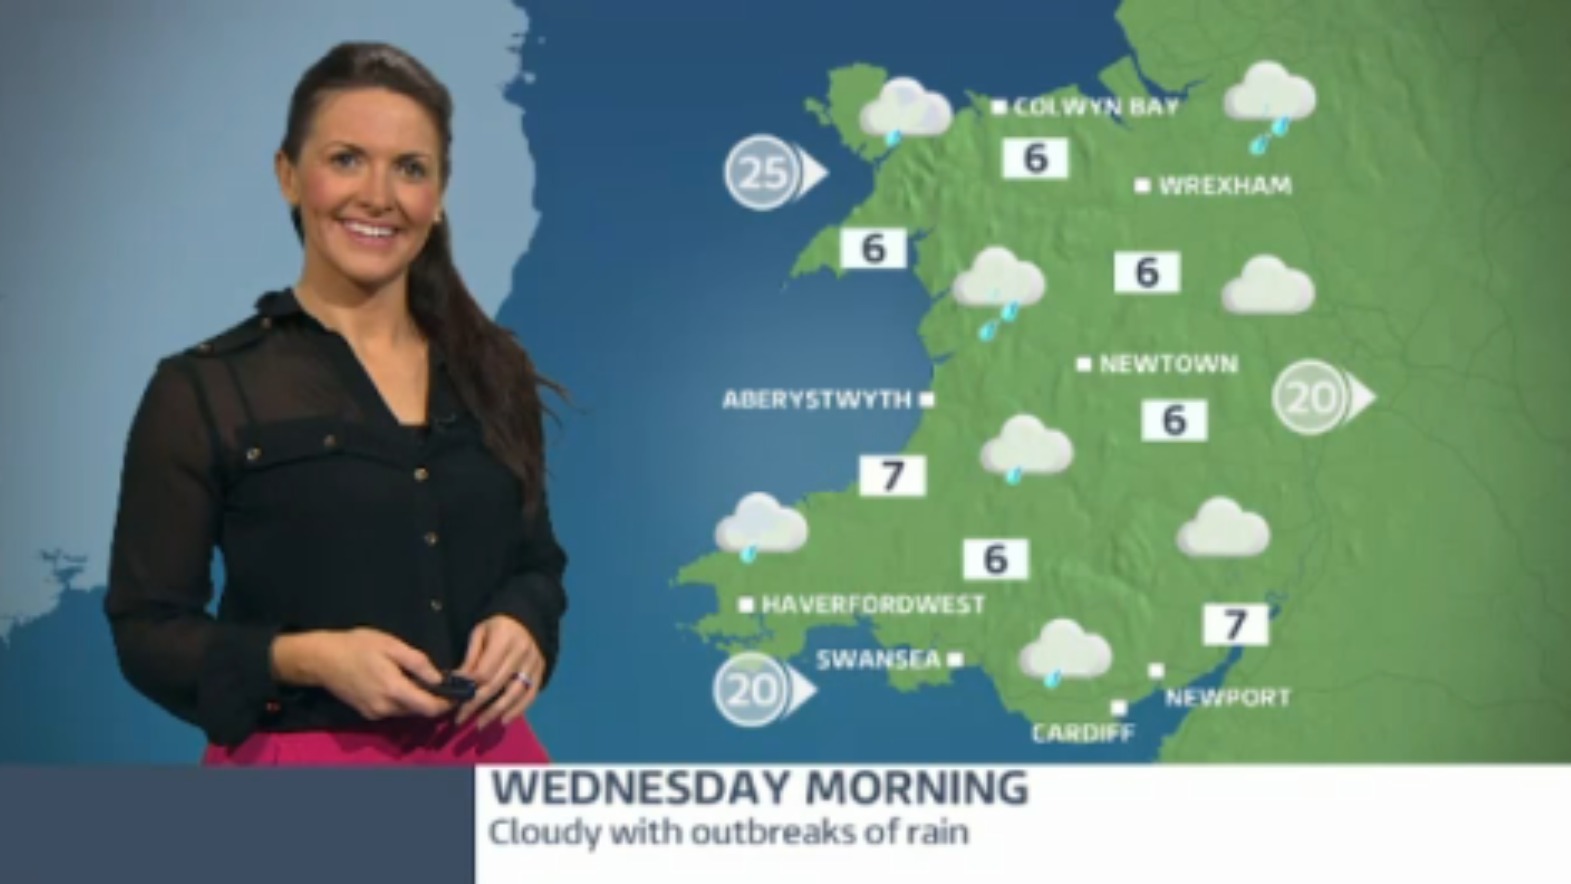 Wales weather: A cloudy and wet day with lighter winds | ITV News Wales